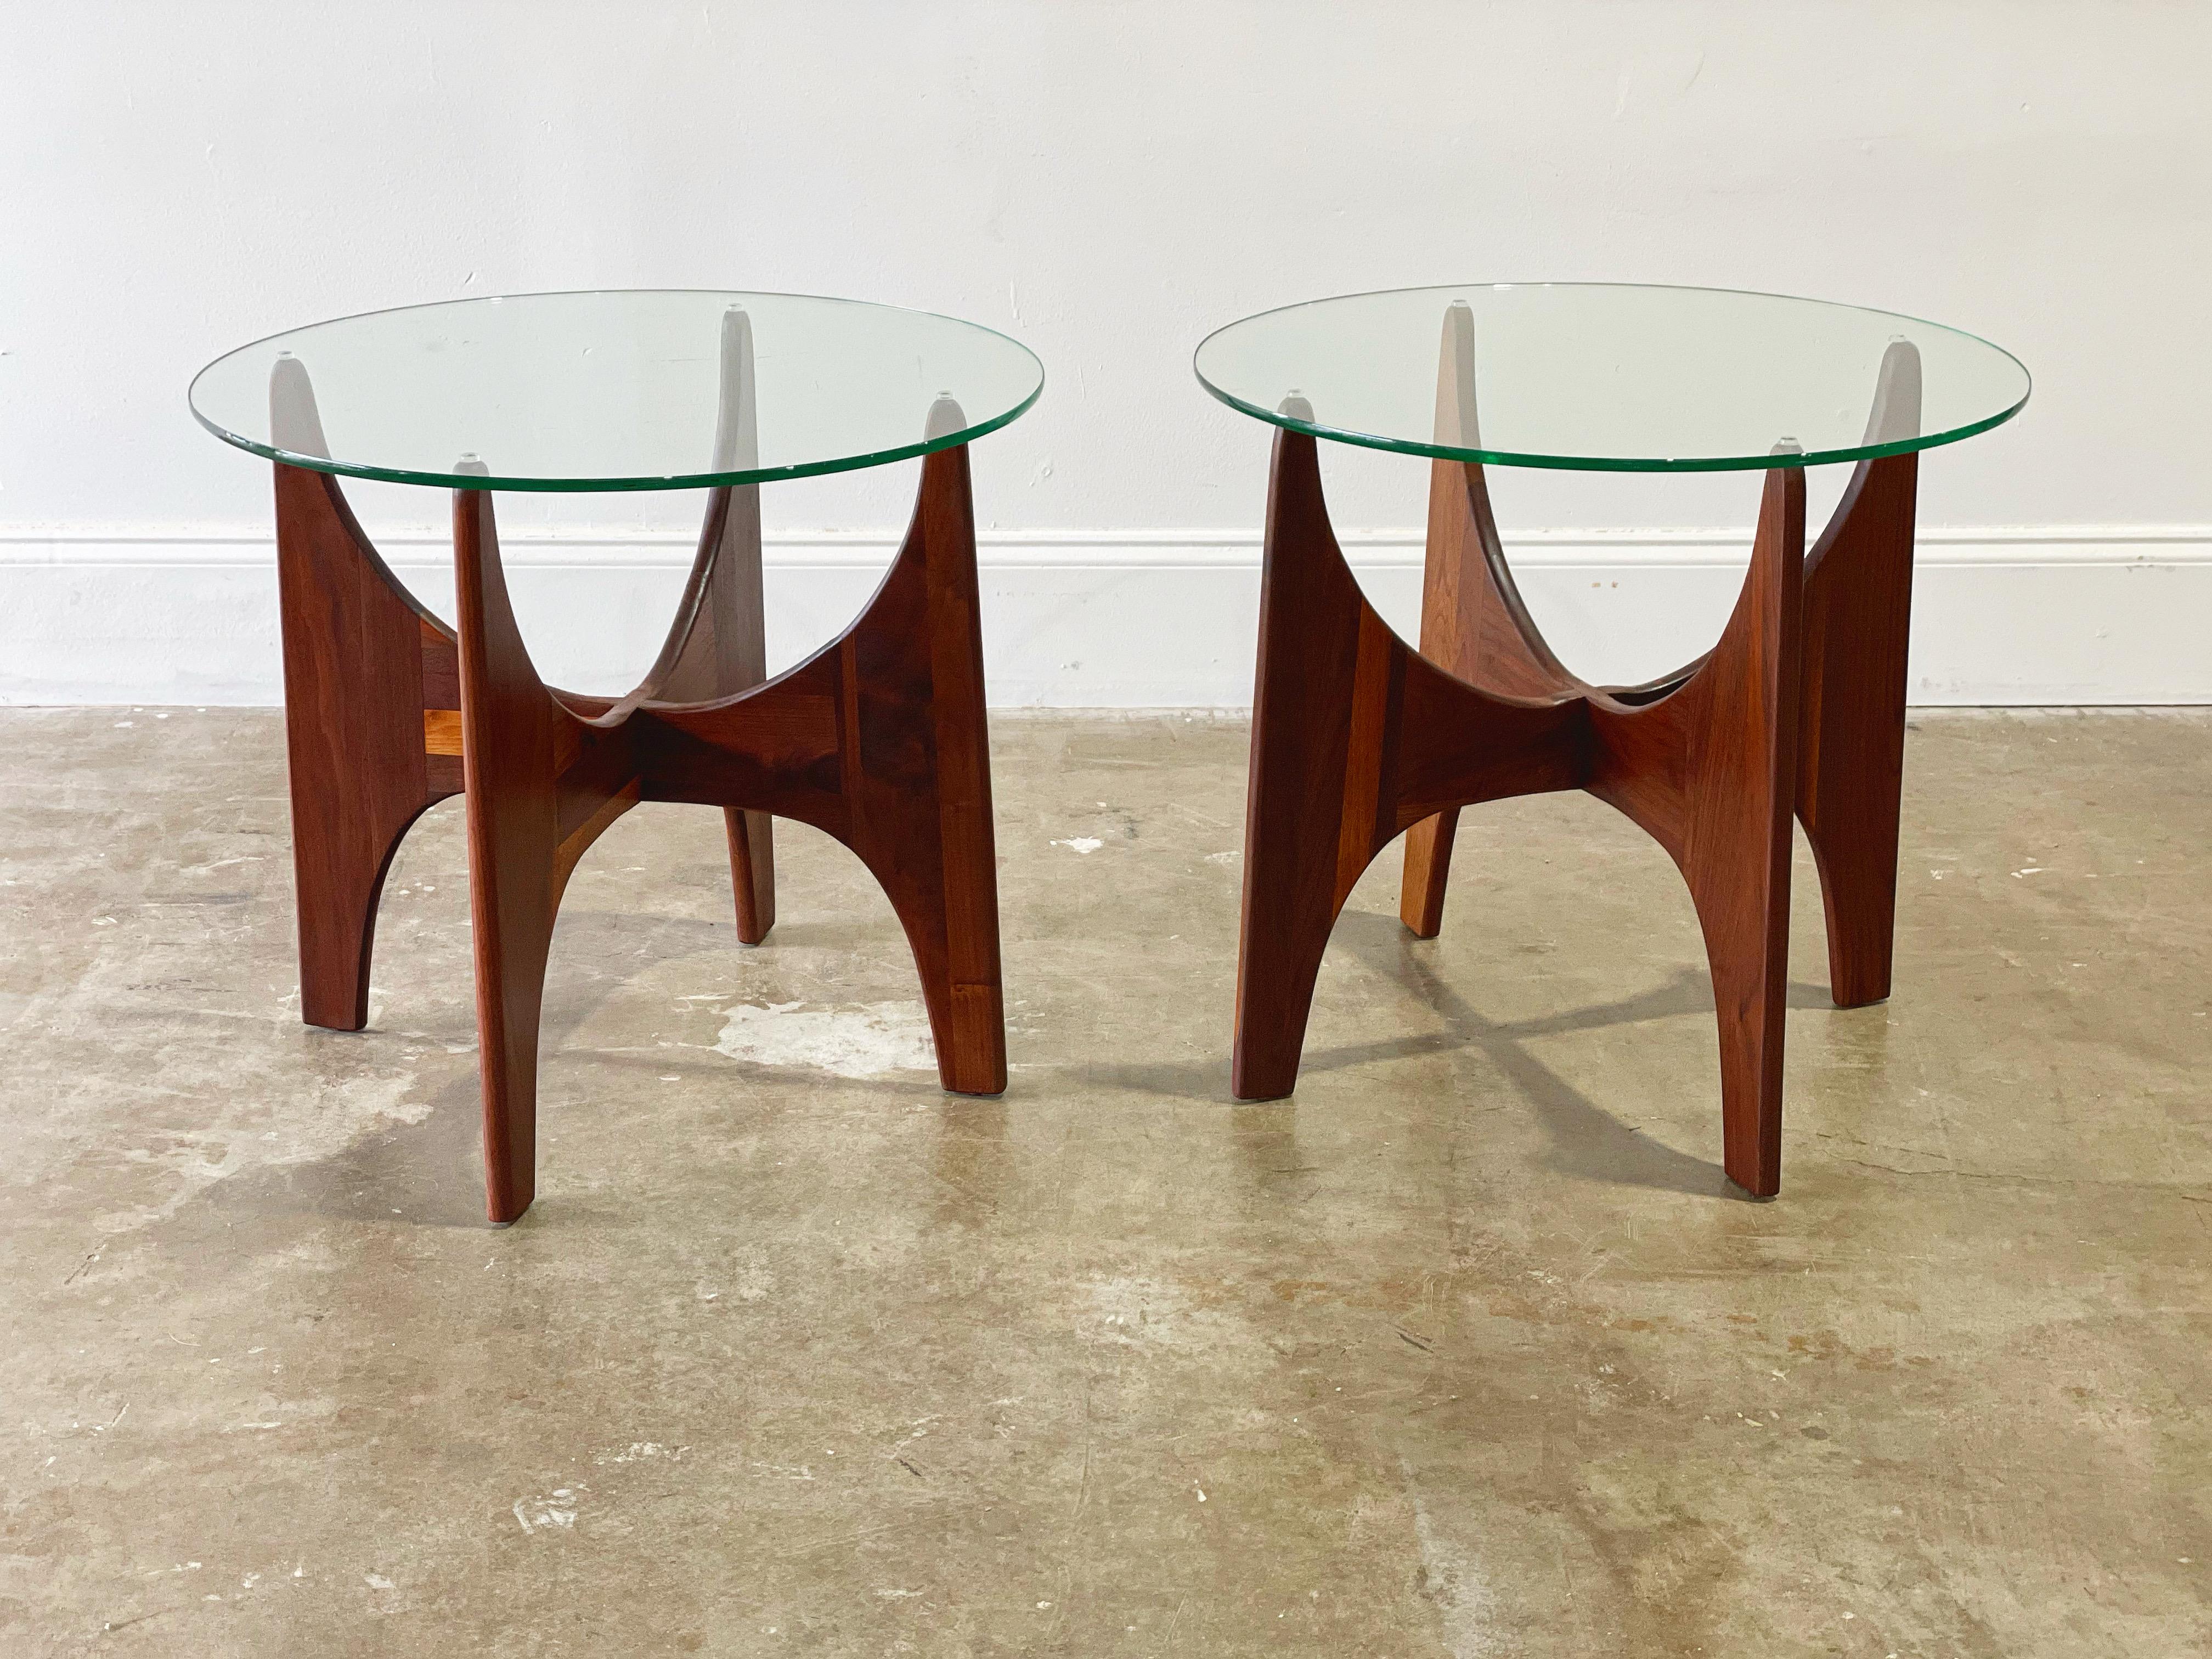 Pair of midcentury modern side tables by Adrian Pearsall for Craft Associates. Solid sculpted American black walnut and glass. Model 1924-T24. Gorgeous atomic silouhette. This pair has been fully restored by our team of in-house craftspeople and are